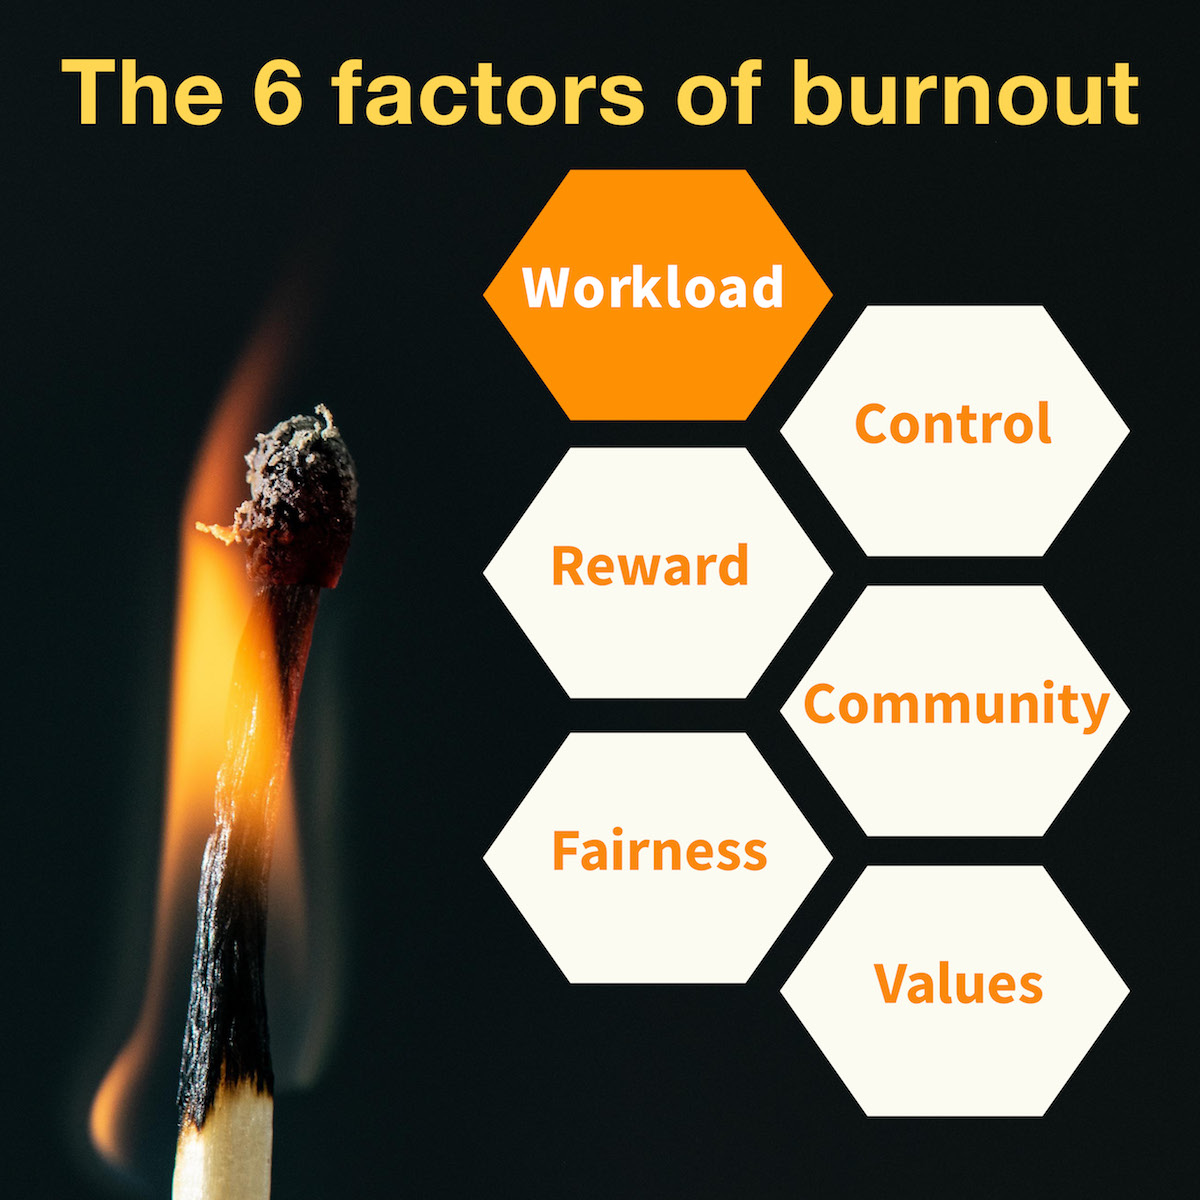 Burning match opposite polygons containing the six factors of burnout: workload, control, reward, community, fairness and values. The workload polygon is highlighted.